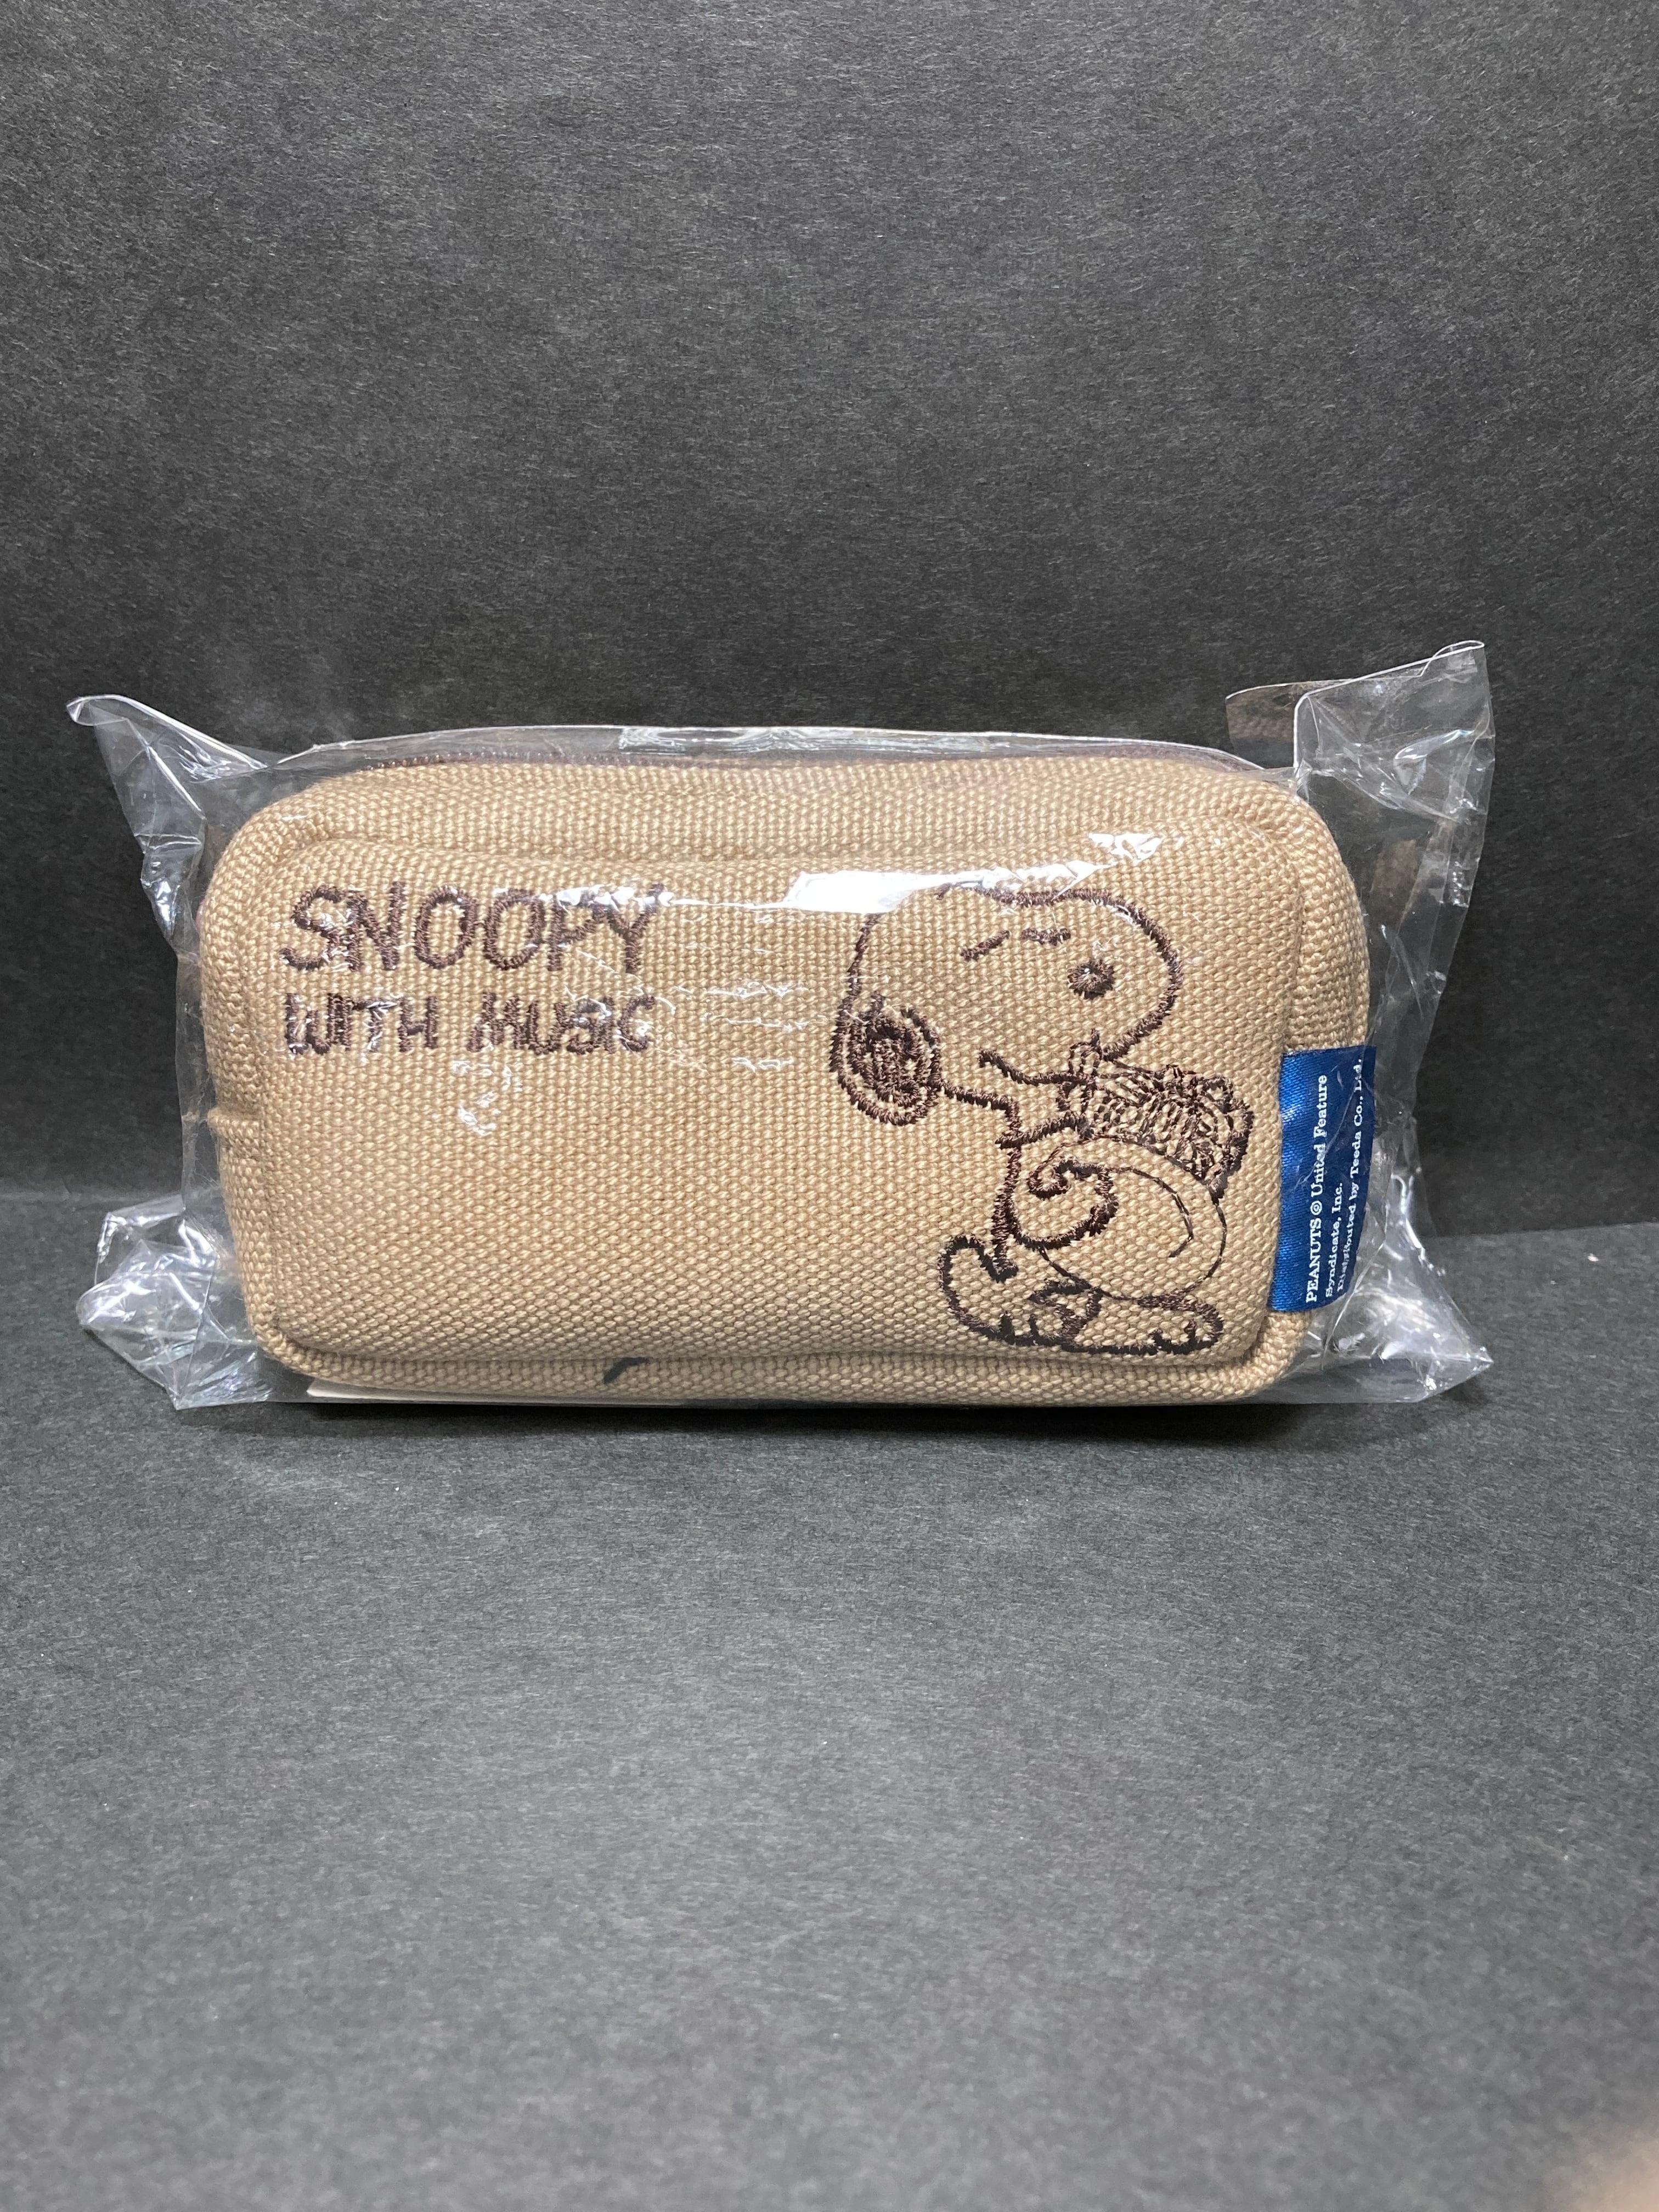 SNOOPY マウスピースポーチ　ホルン | 高見楽器工房webshop powered by BASE